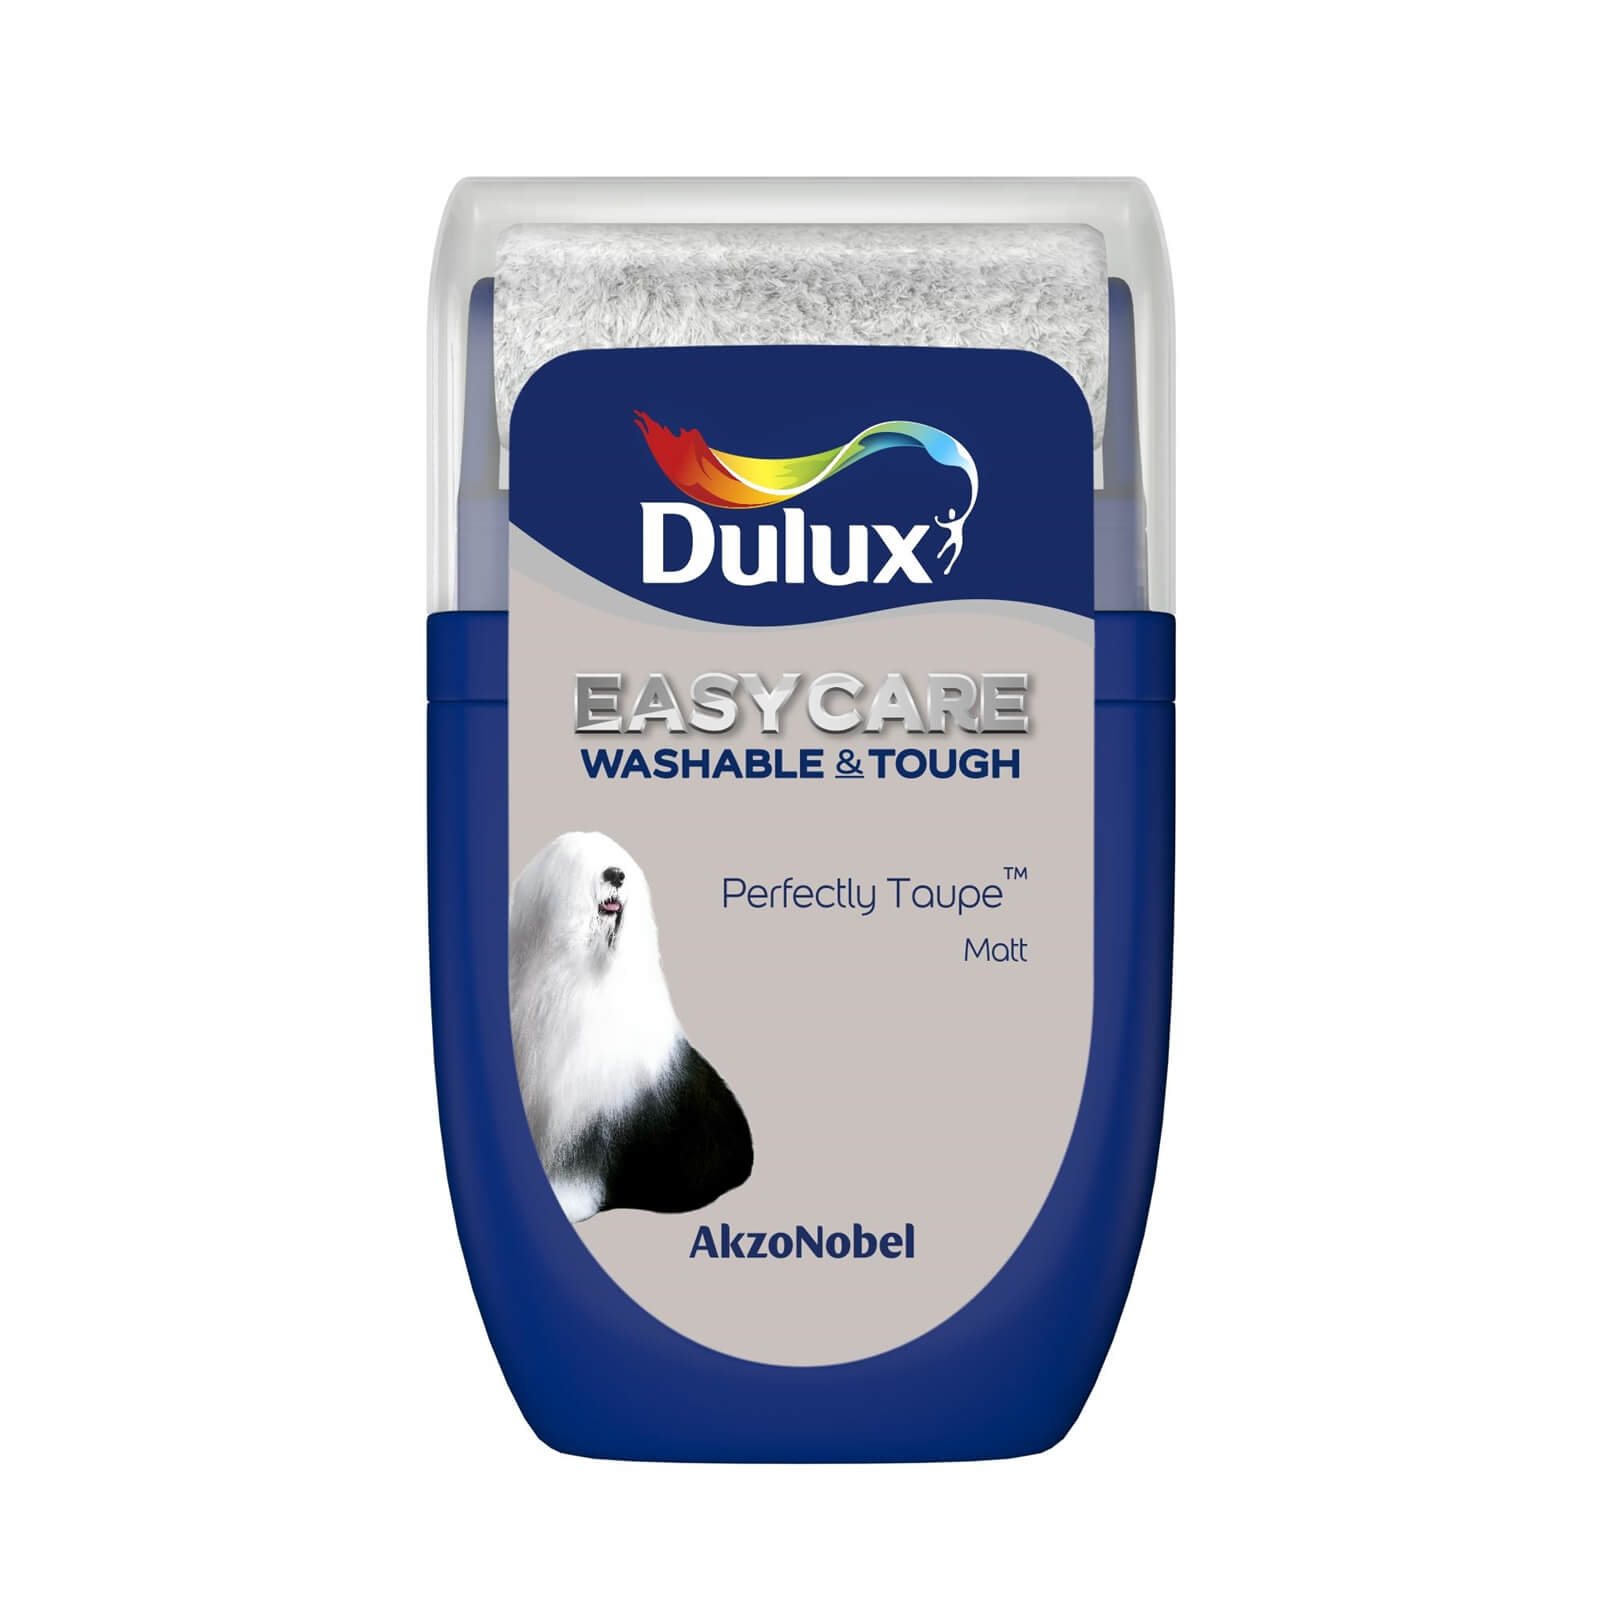 Dulux Easycare Washable & Tough Matt Paint Perfectly Taupe - Tester 30ml